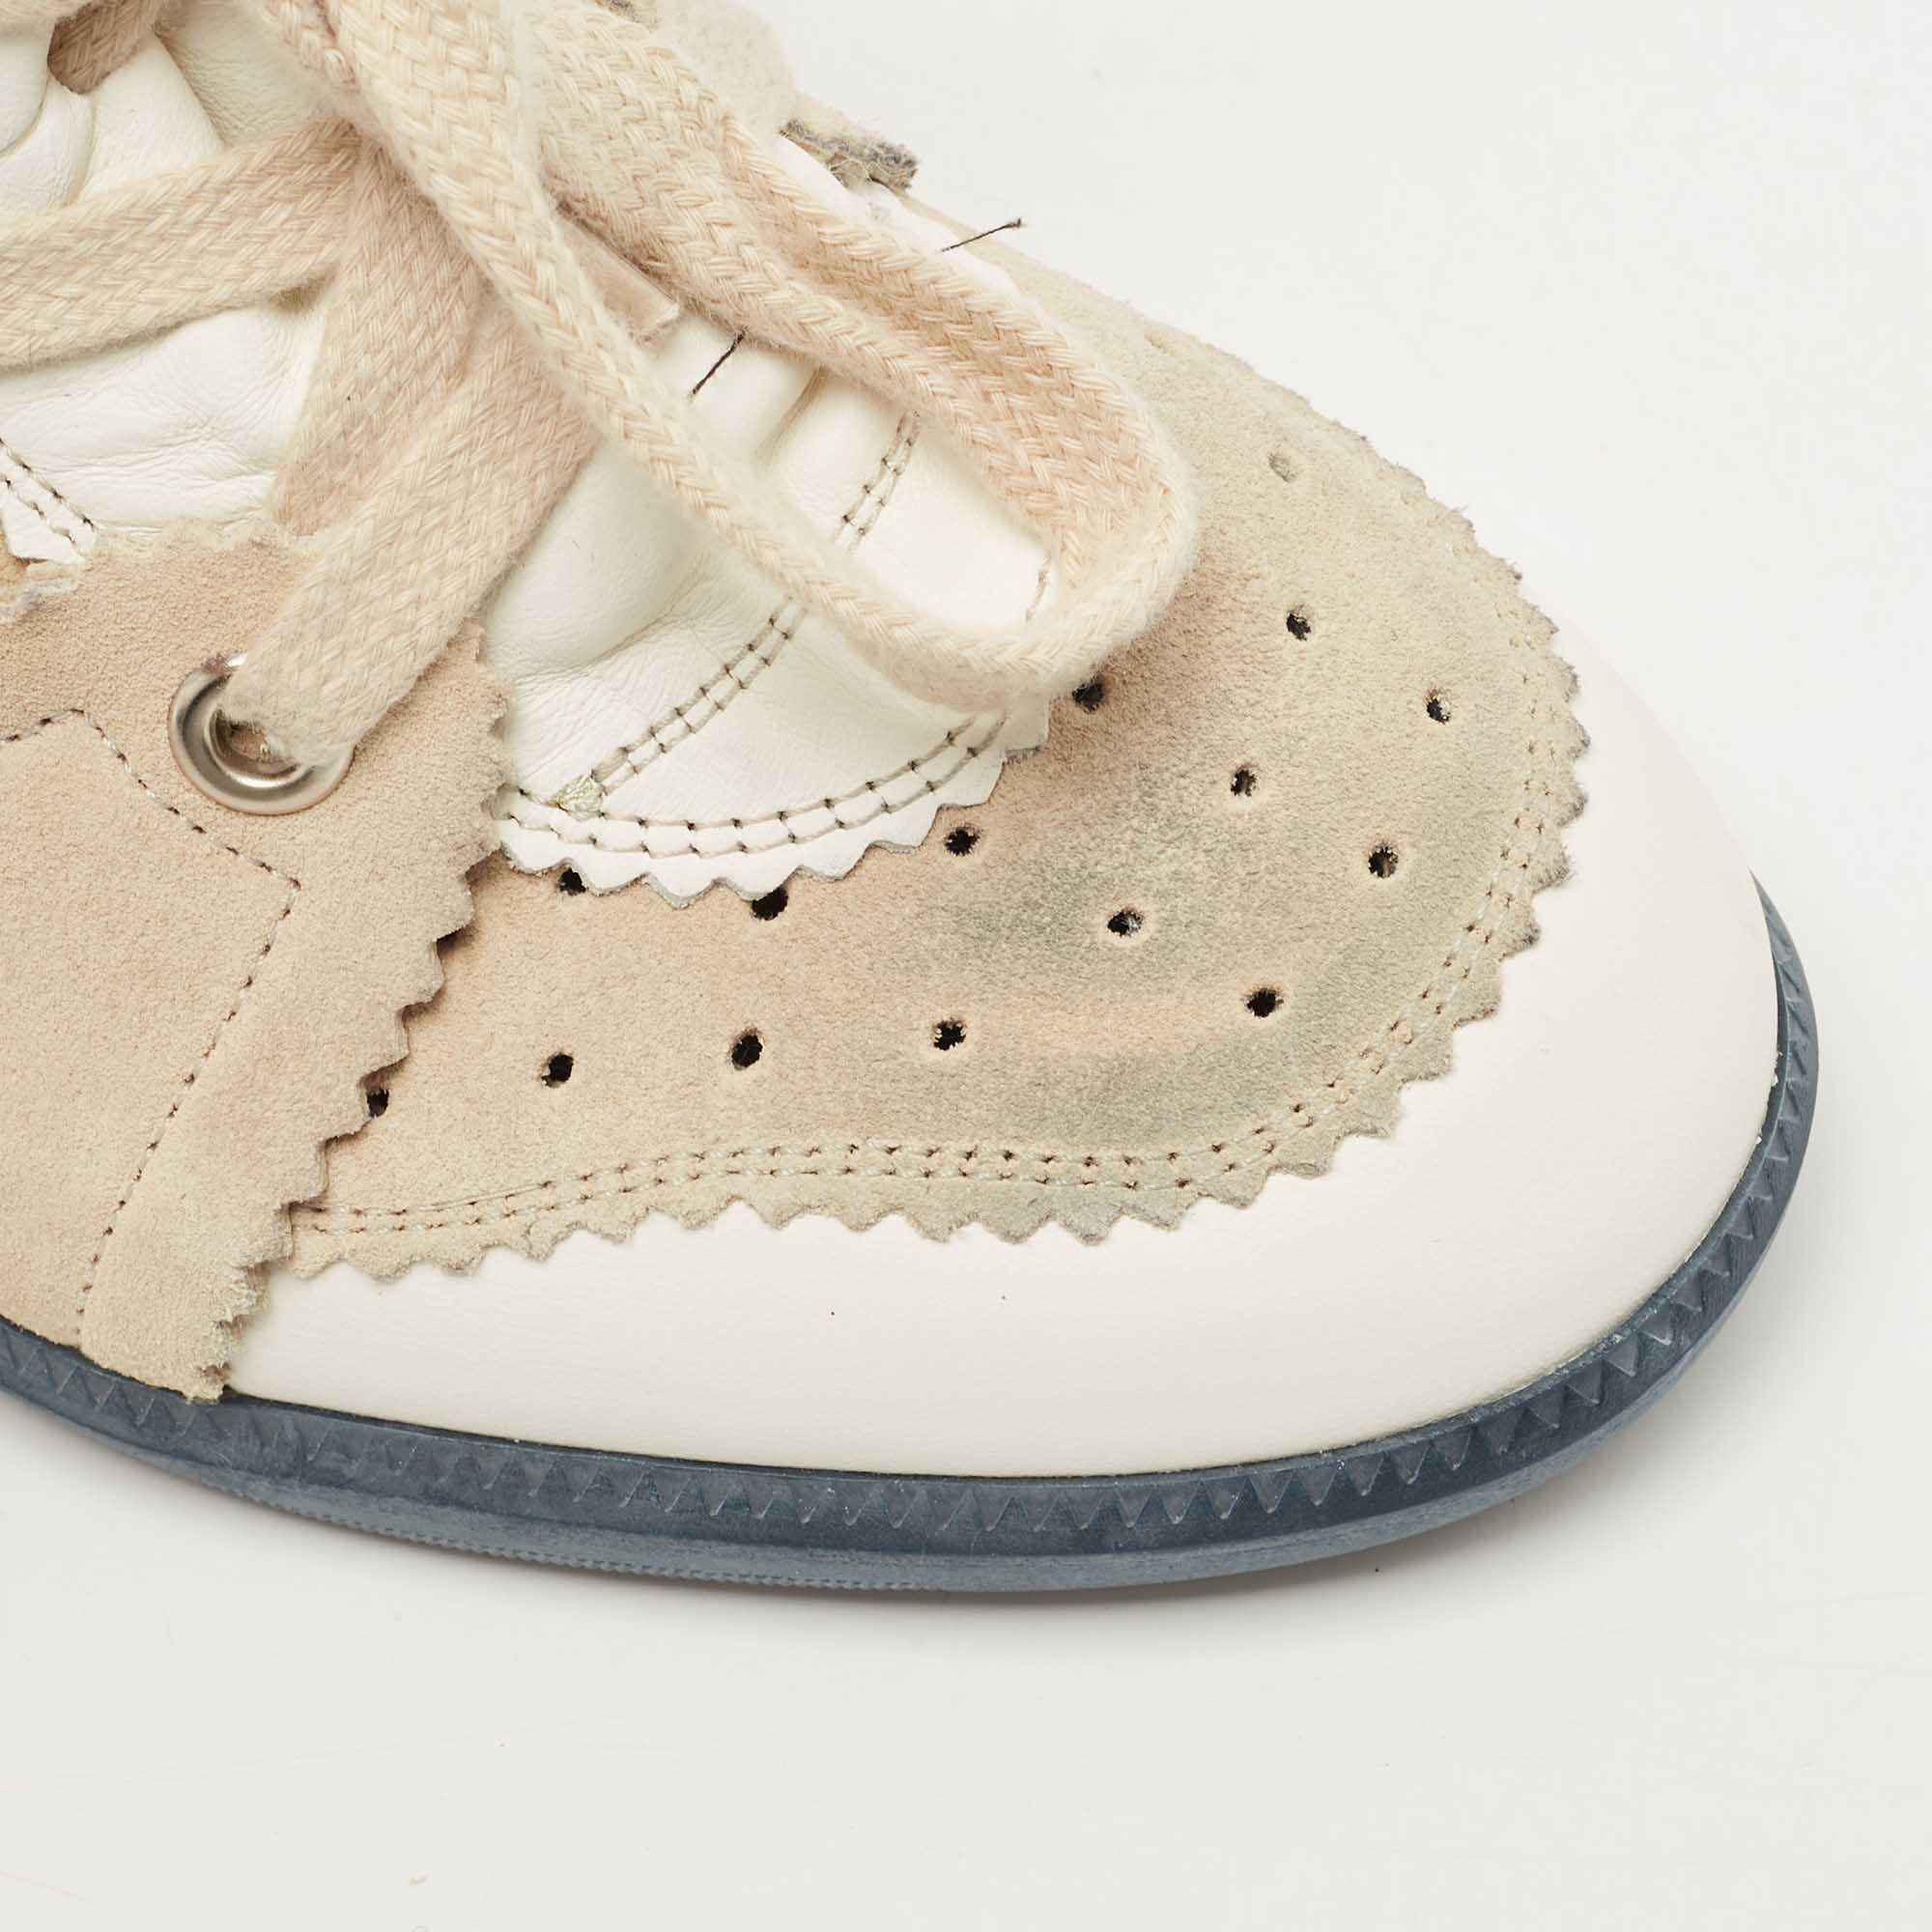 Isabel Marant Tricolor Leather And Suede Bobby Wedge Sneakers Size 40